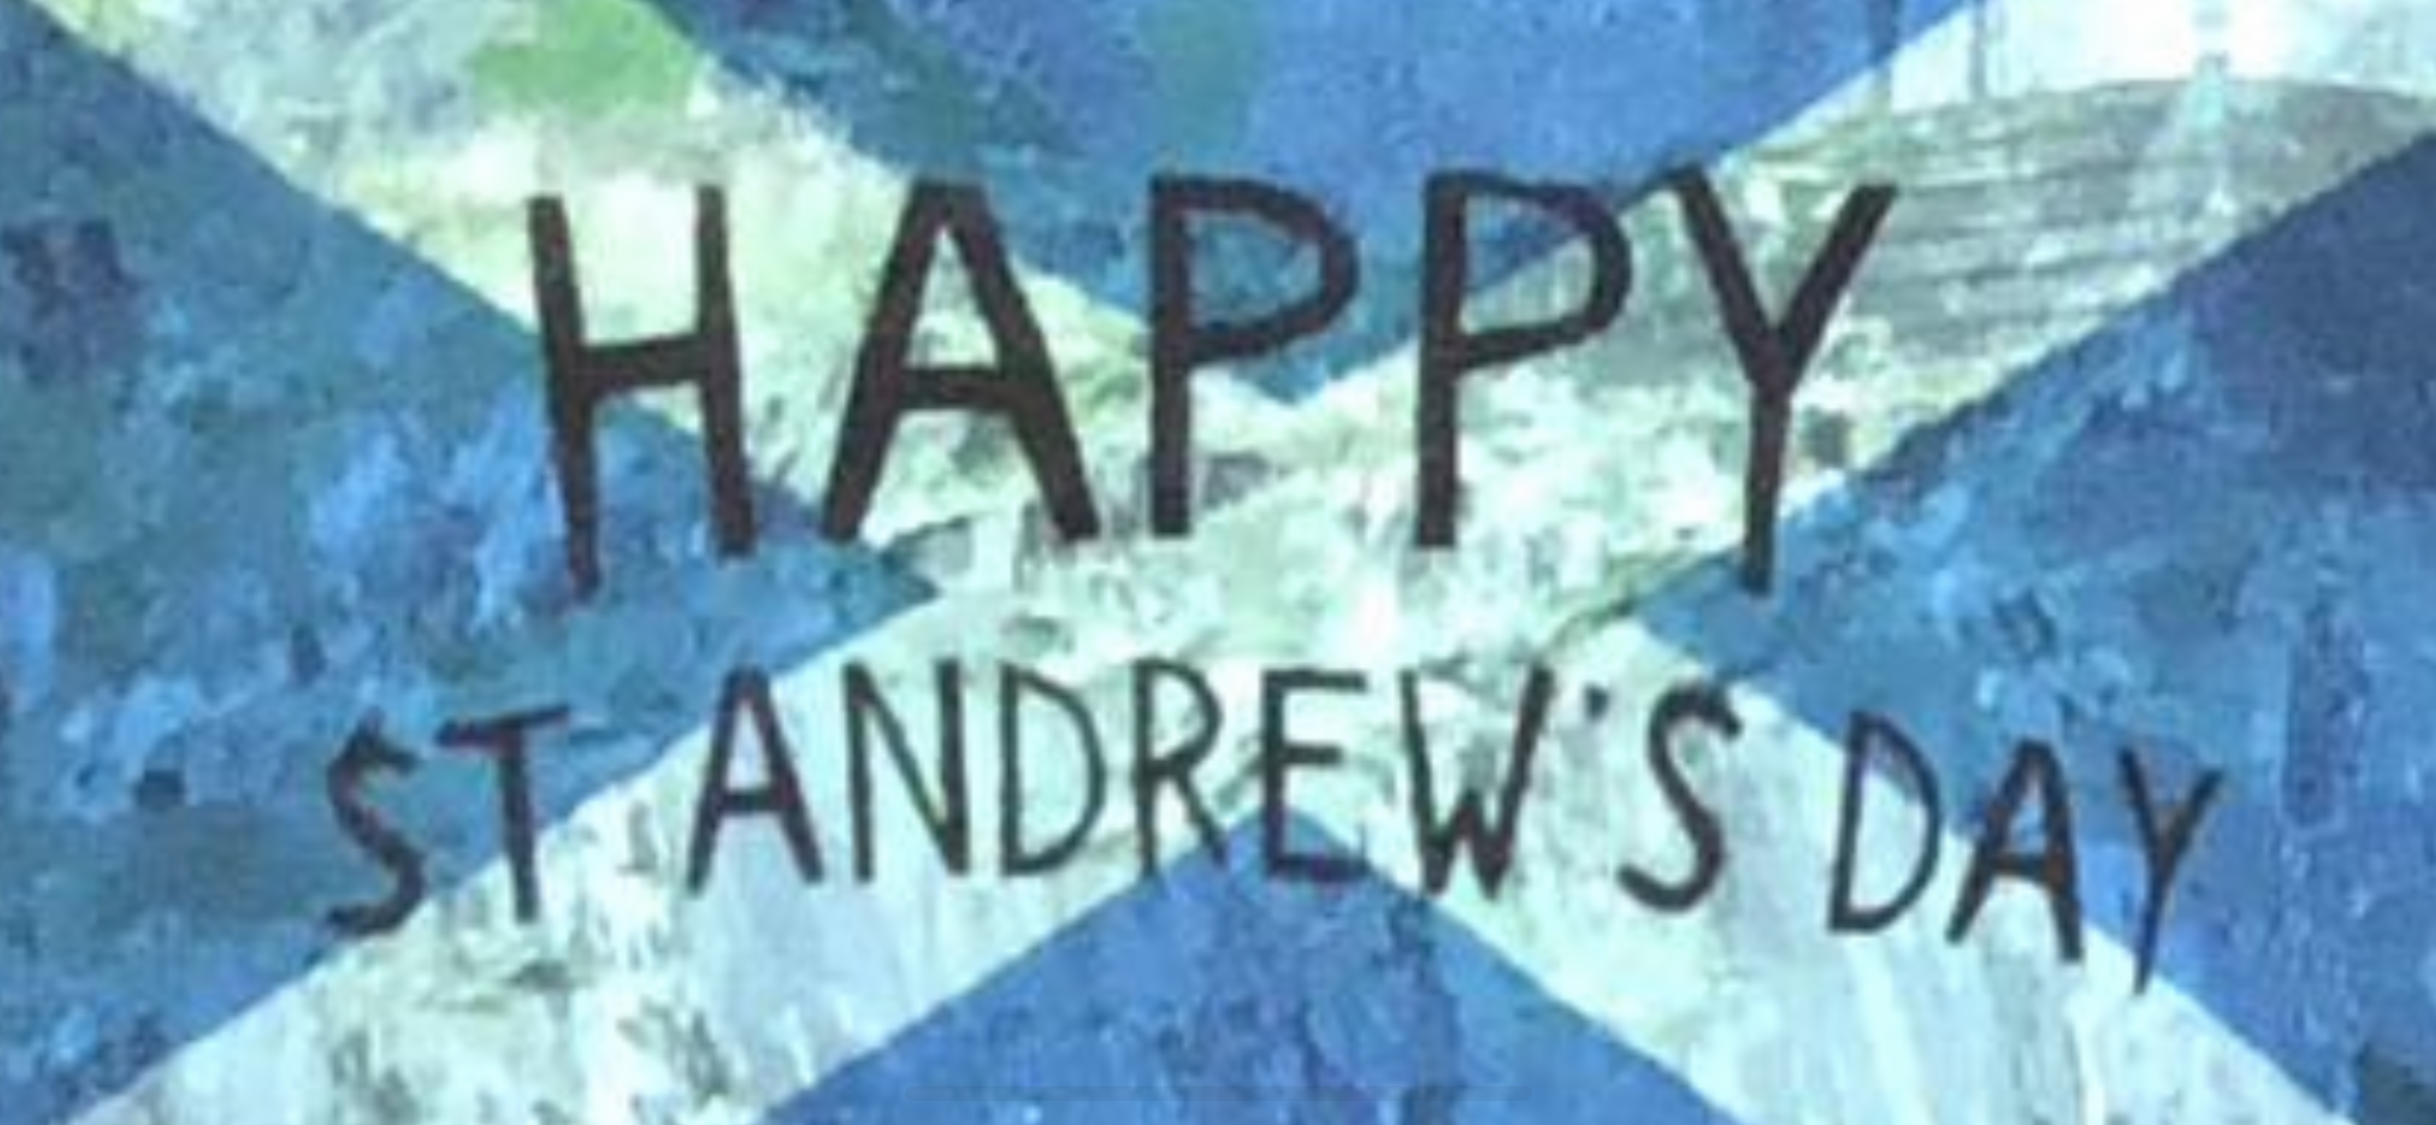 St. Andrew’s day. The Scottish shop